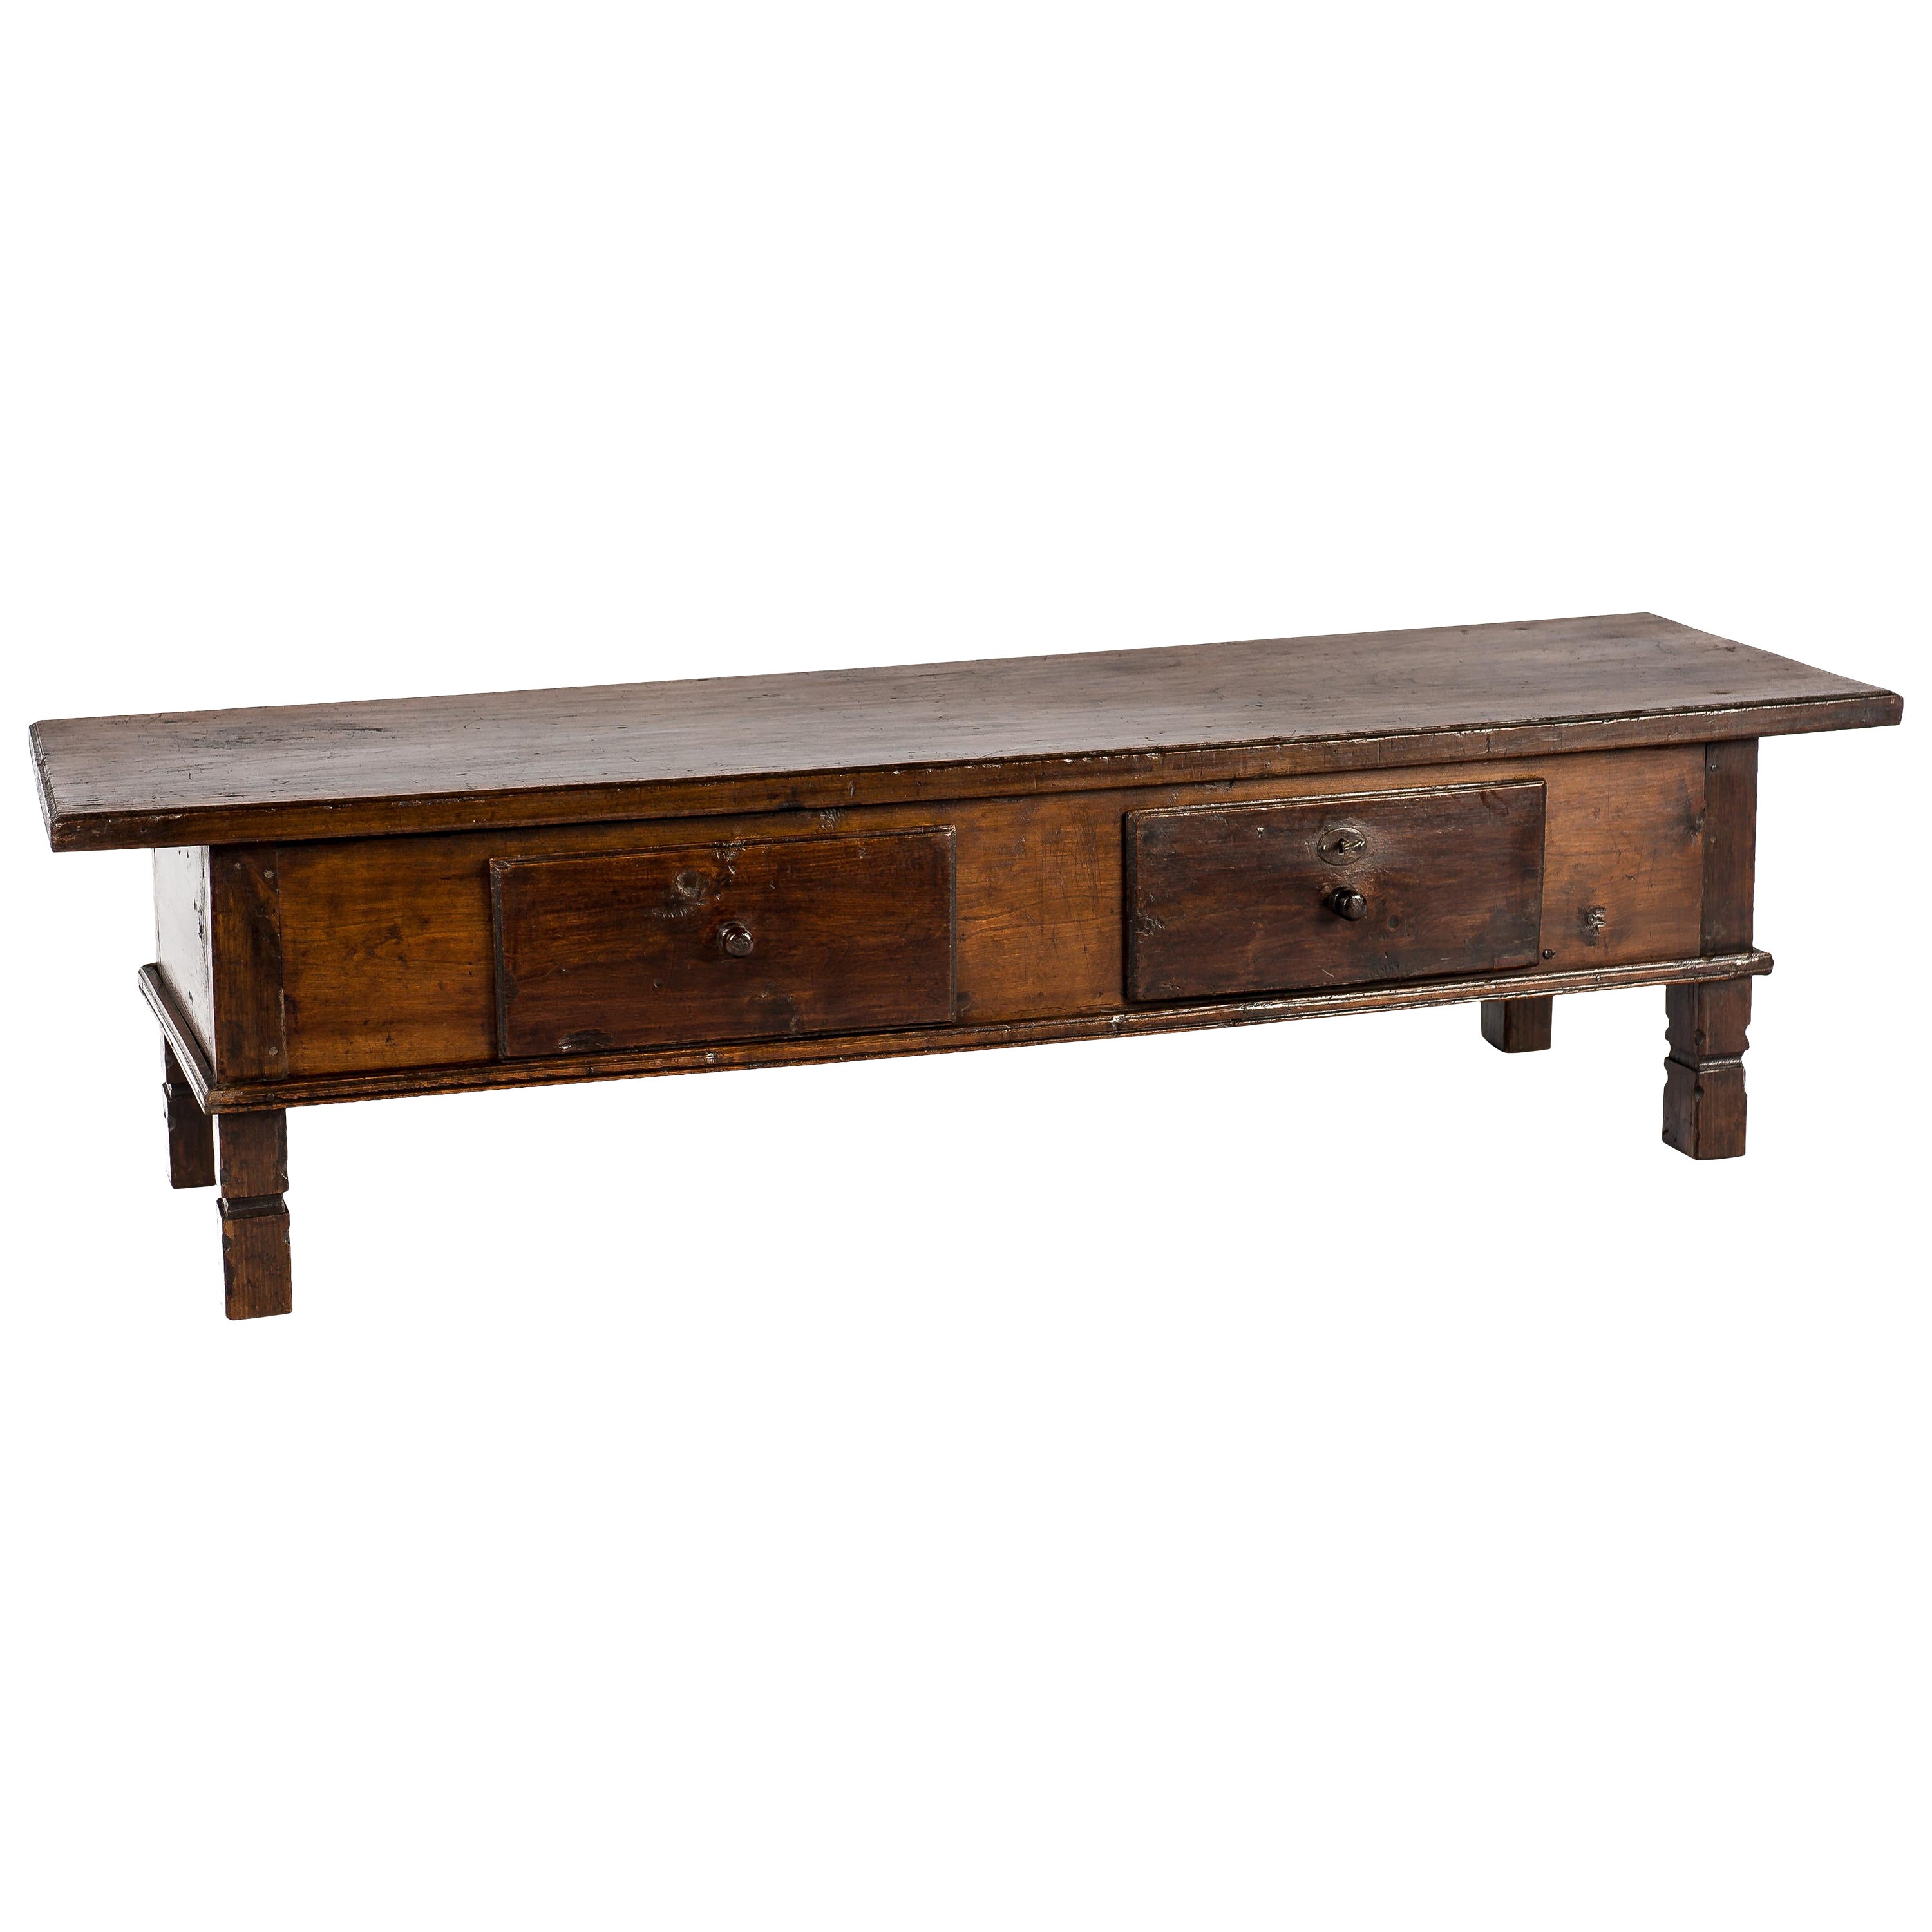 Antique Late 18th-Century Rustic Spanish Warm Brown Chestnut Coffee Table